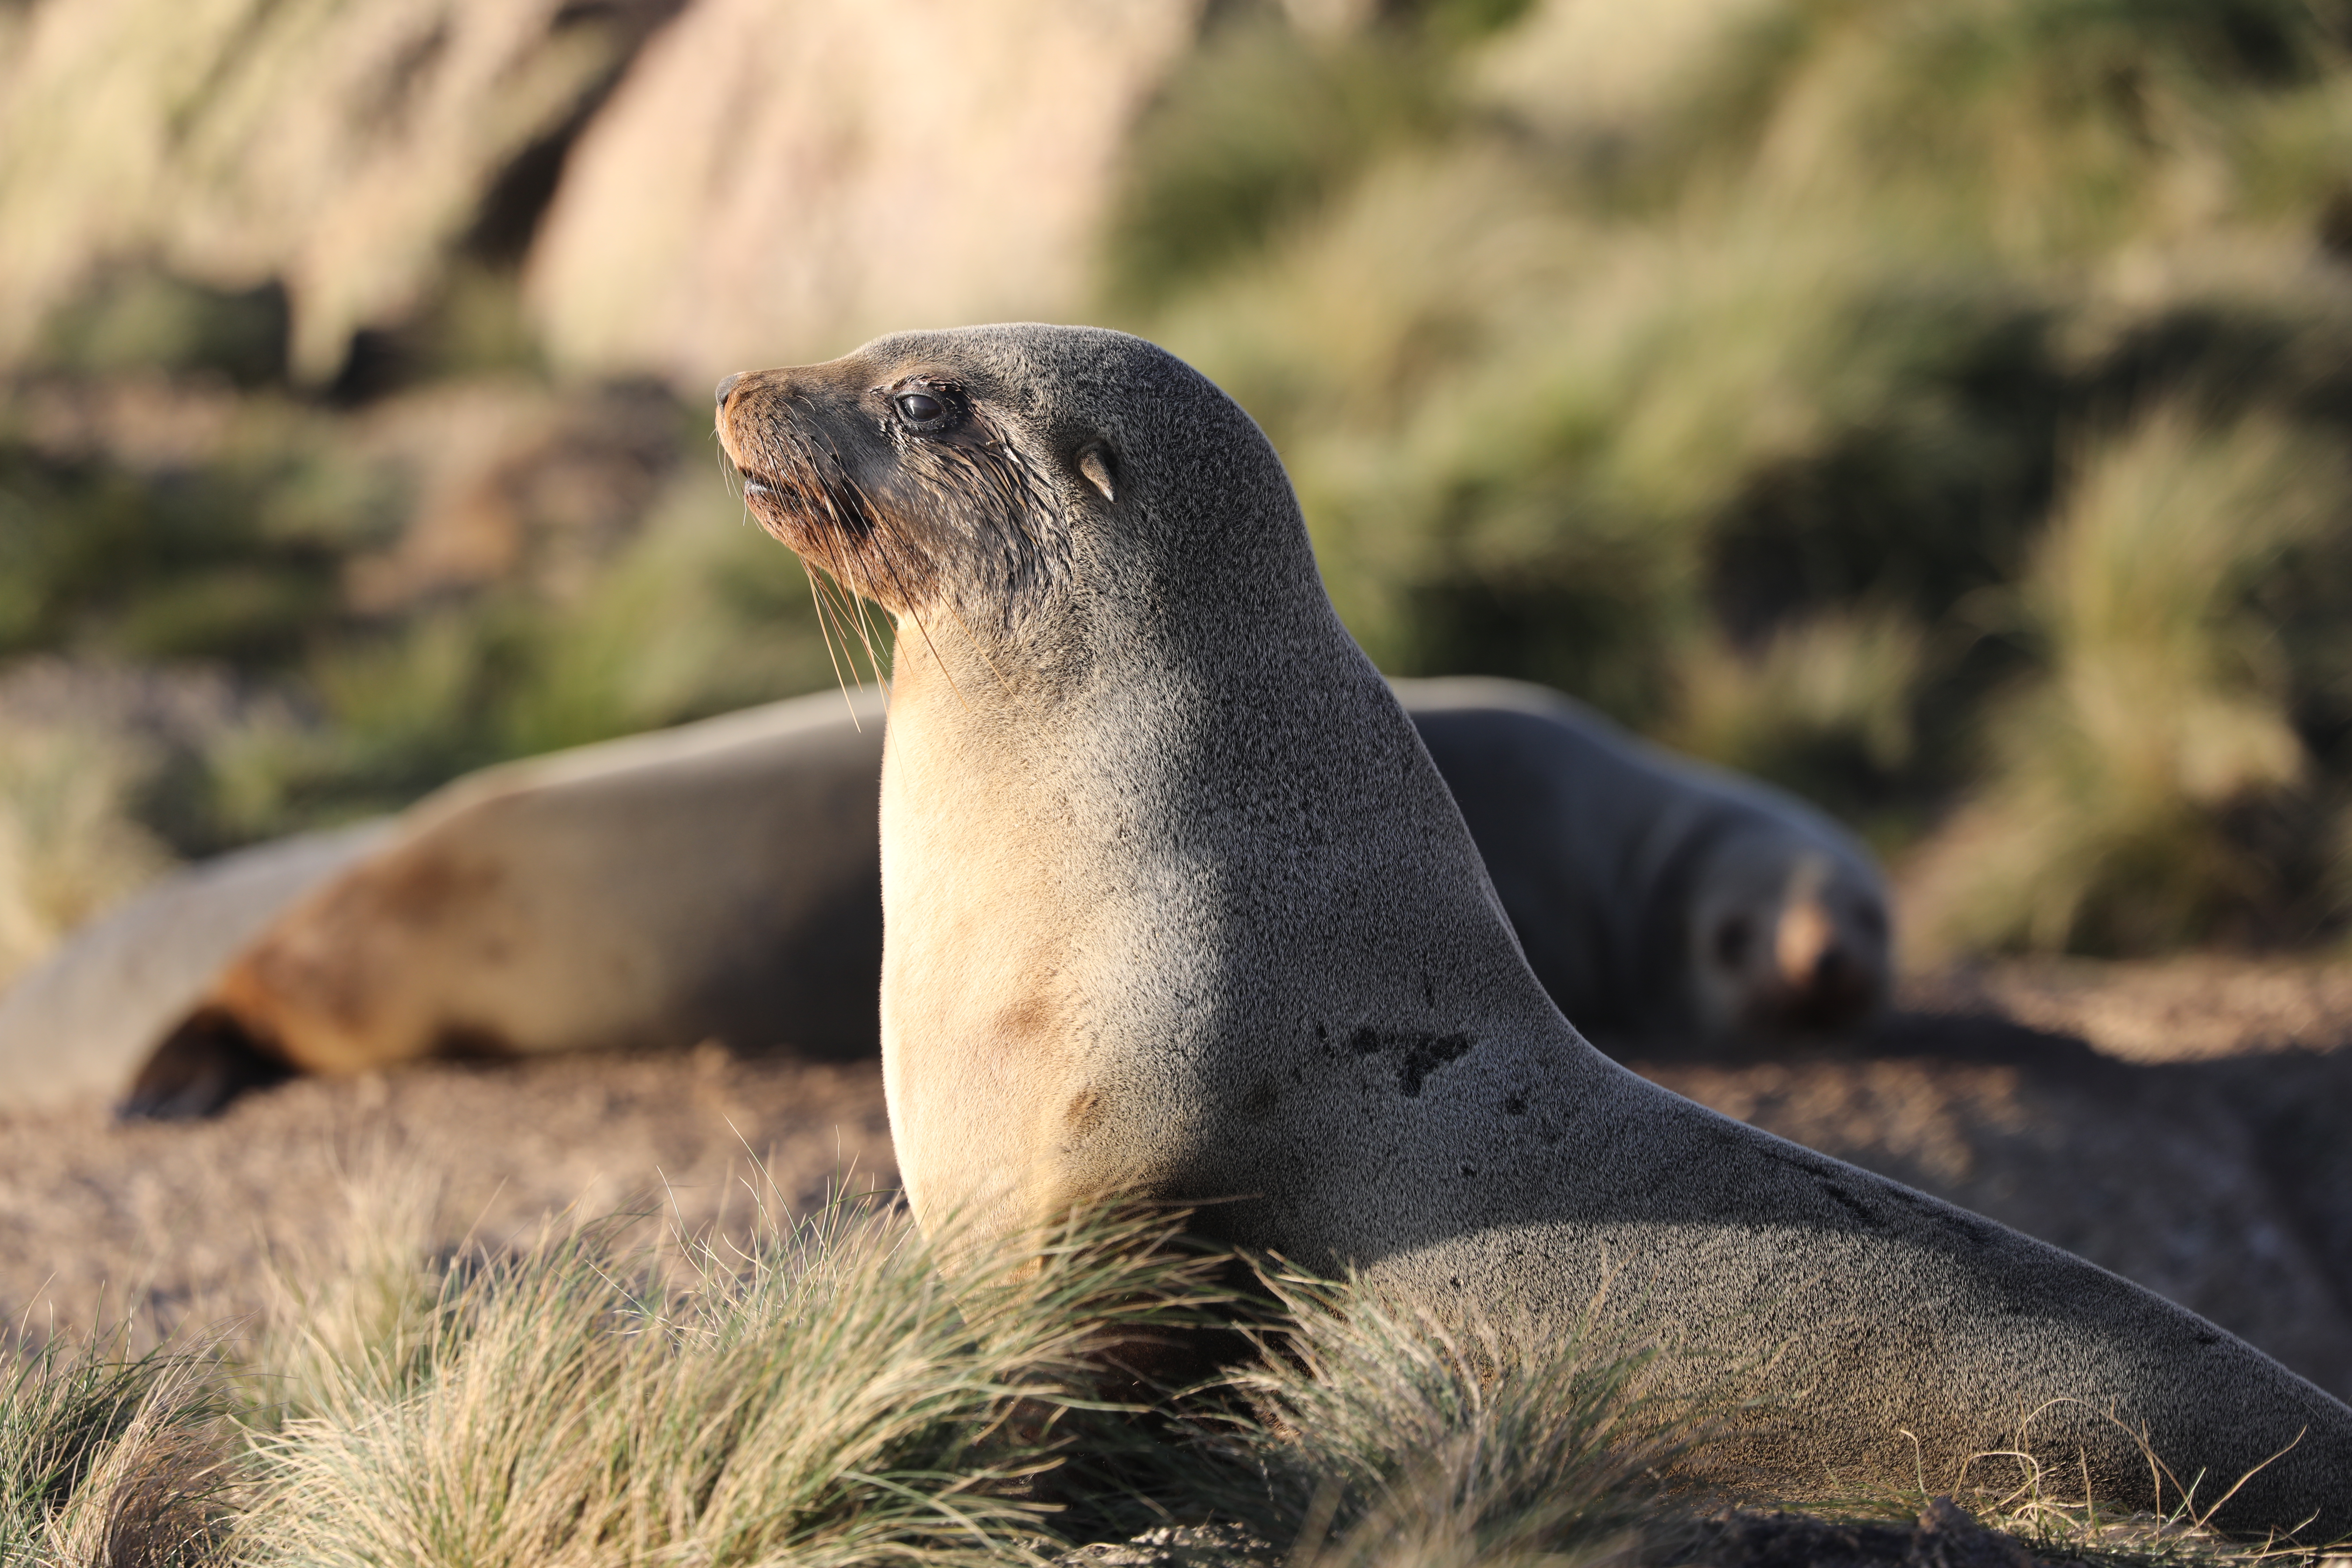 Image of Australian Fur Seal, neck lifted